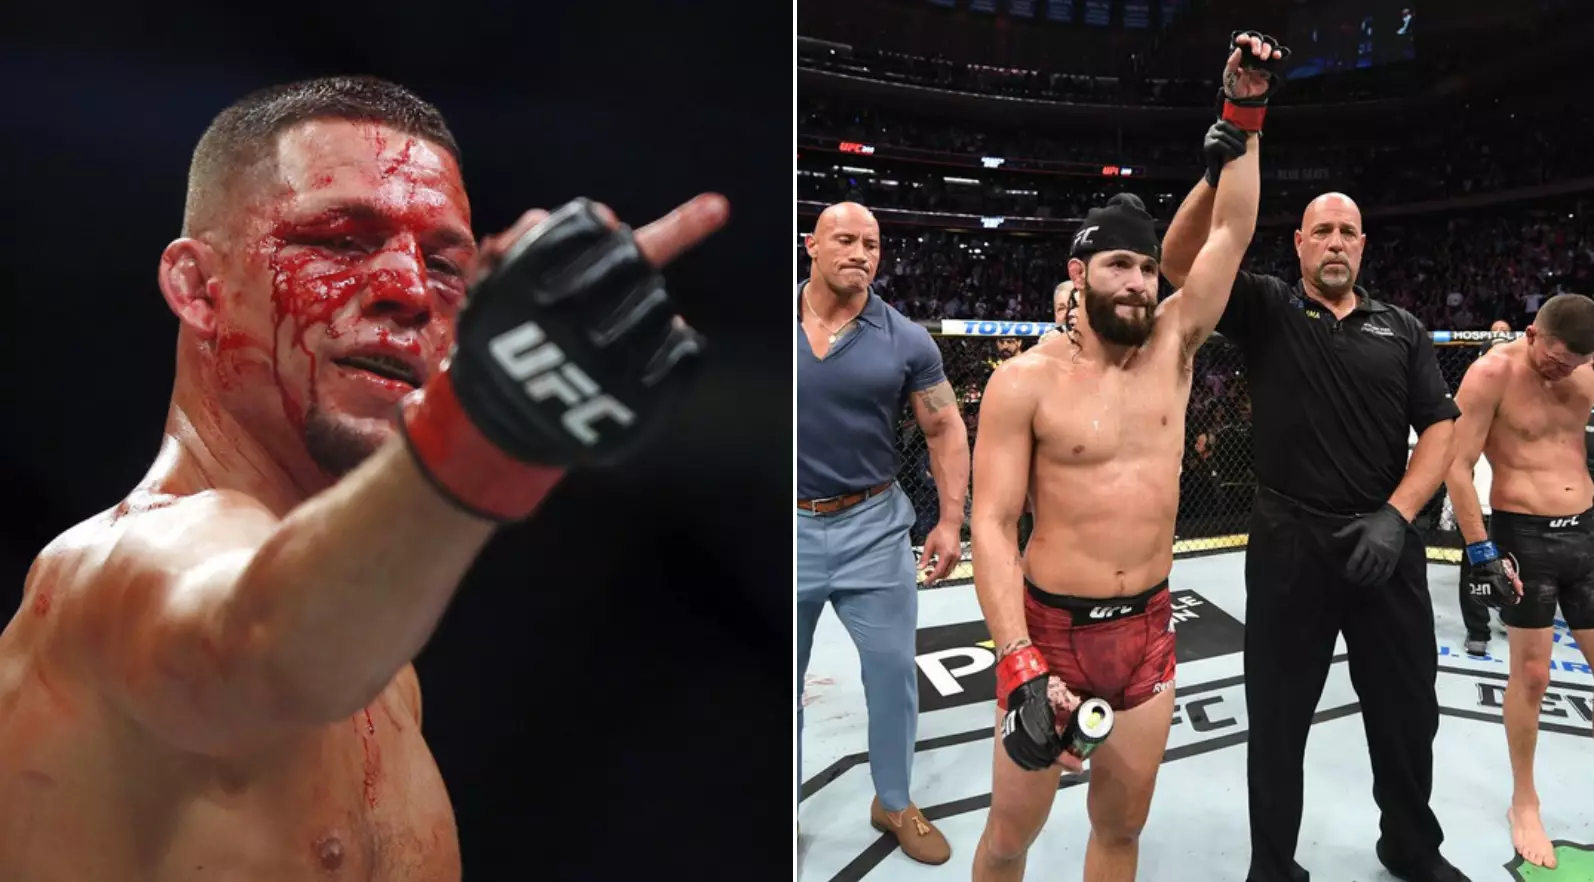 Nate Diaz Responds To Jorge Masvidal's Call To 'Run It Back' Inside The Octagon